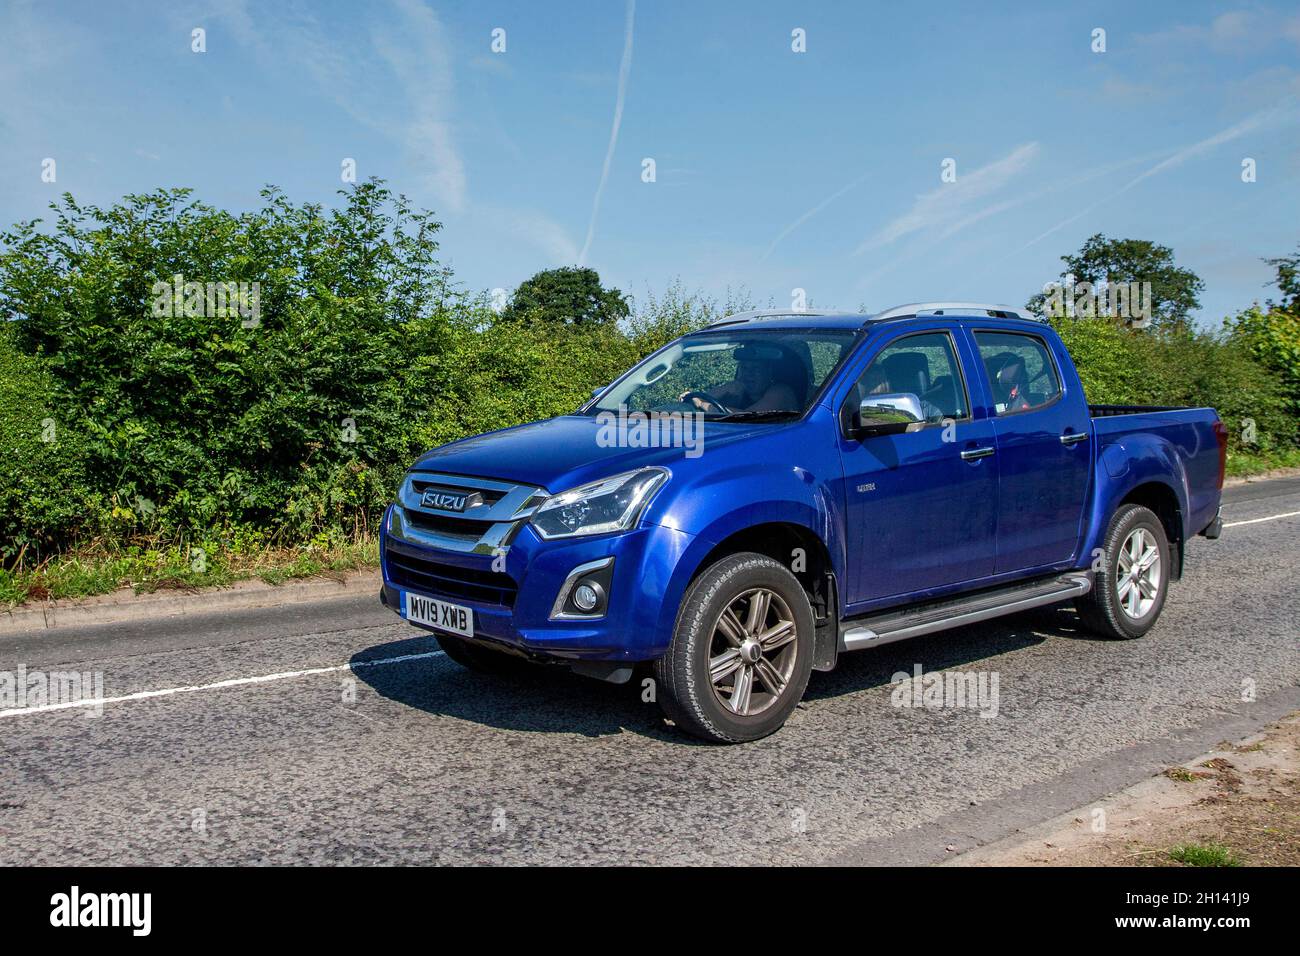 2019 blue Isuzu D-Max Utah V-Cross, limited-edition version  double-cab pickup en-route to Capesthorne Hall classic August car show, Cheshire, UK Stock Photo